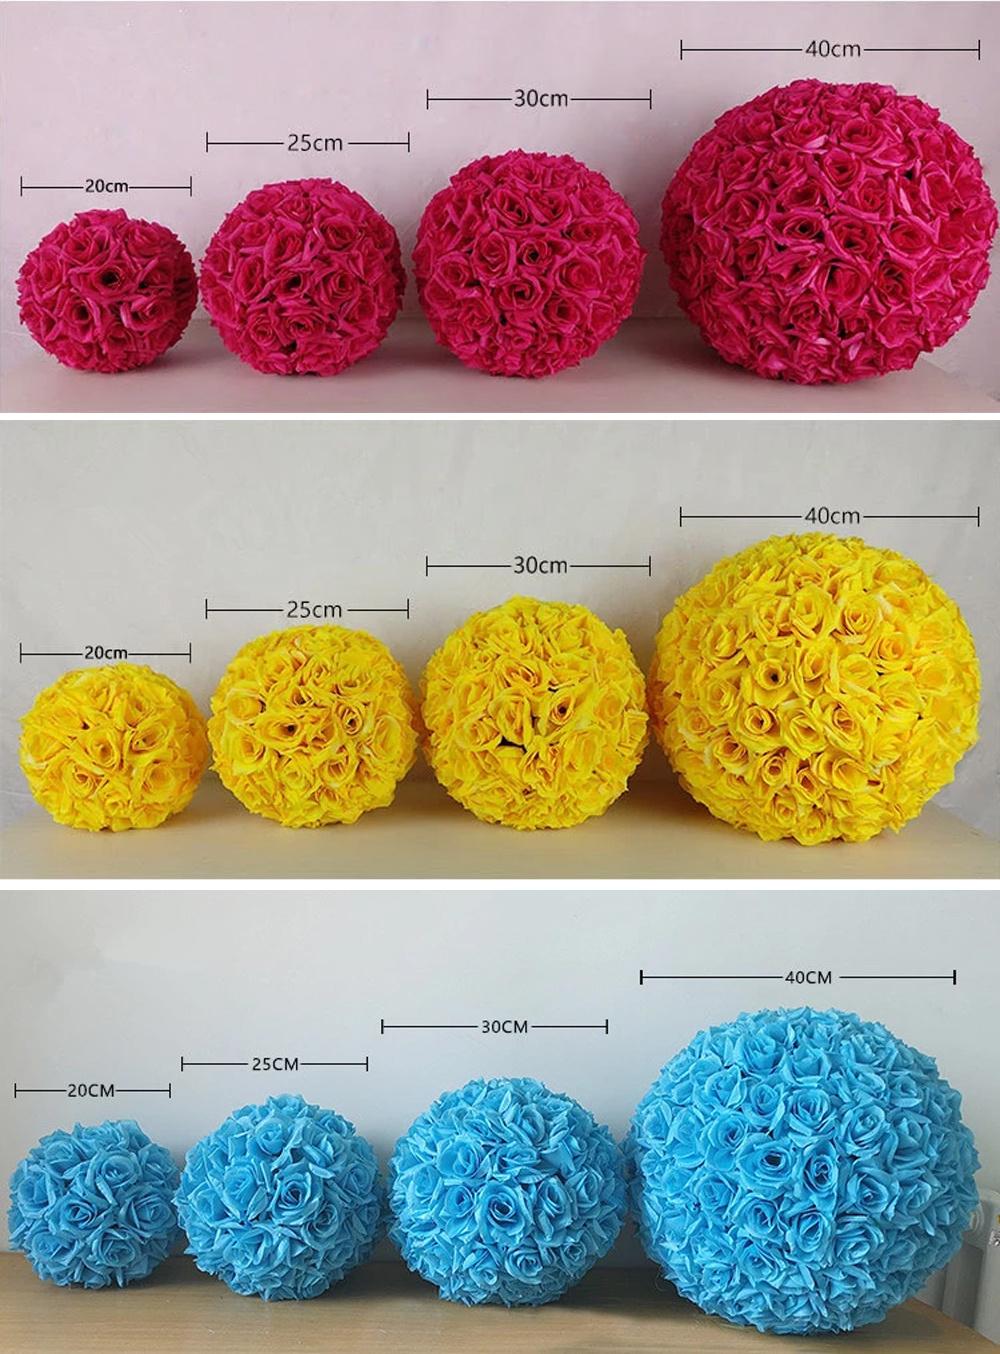 Colorful Artificial Flower Ball for Wedding Centerpiece Decoration